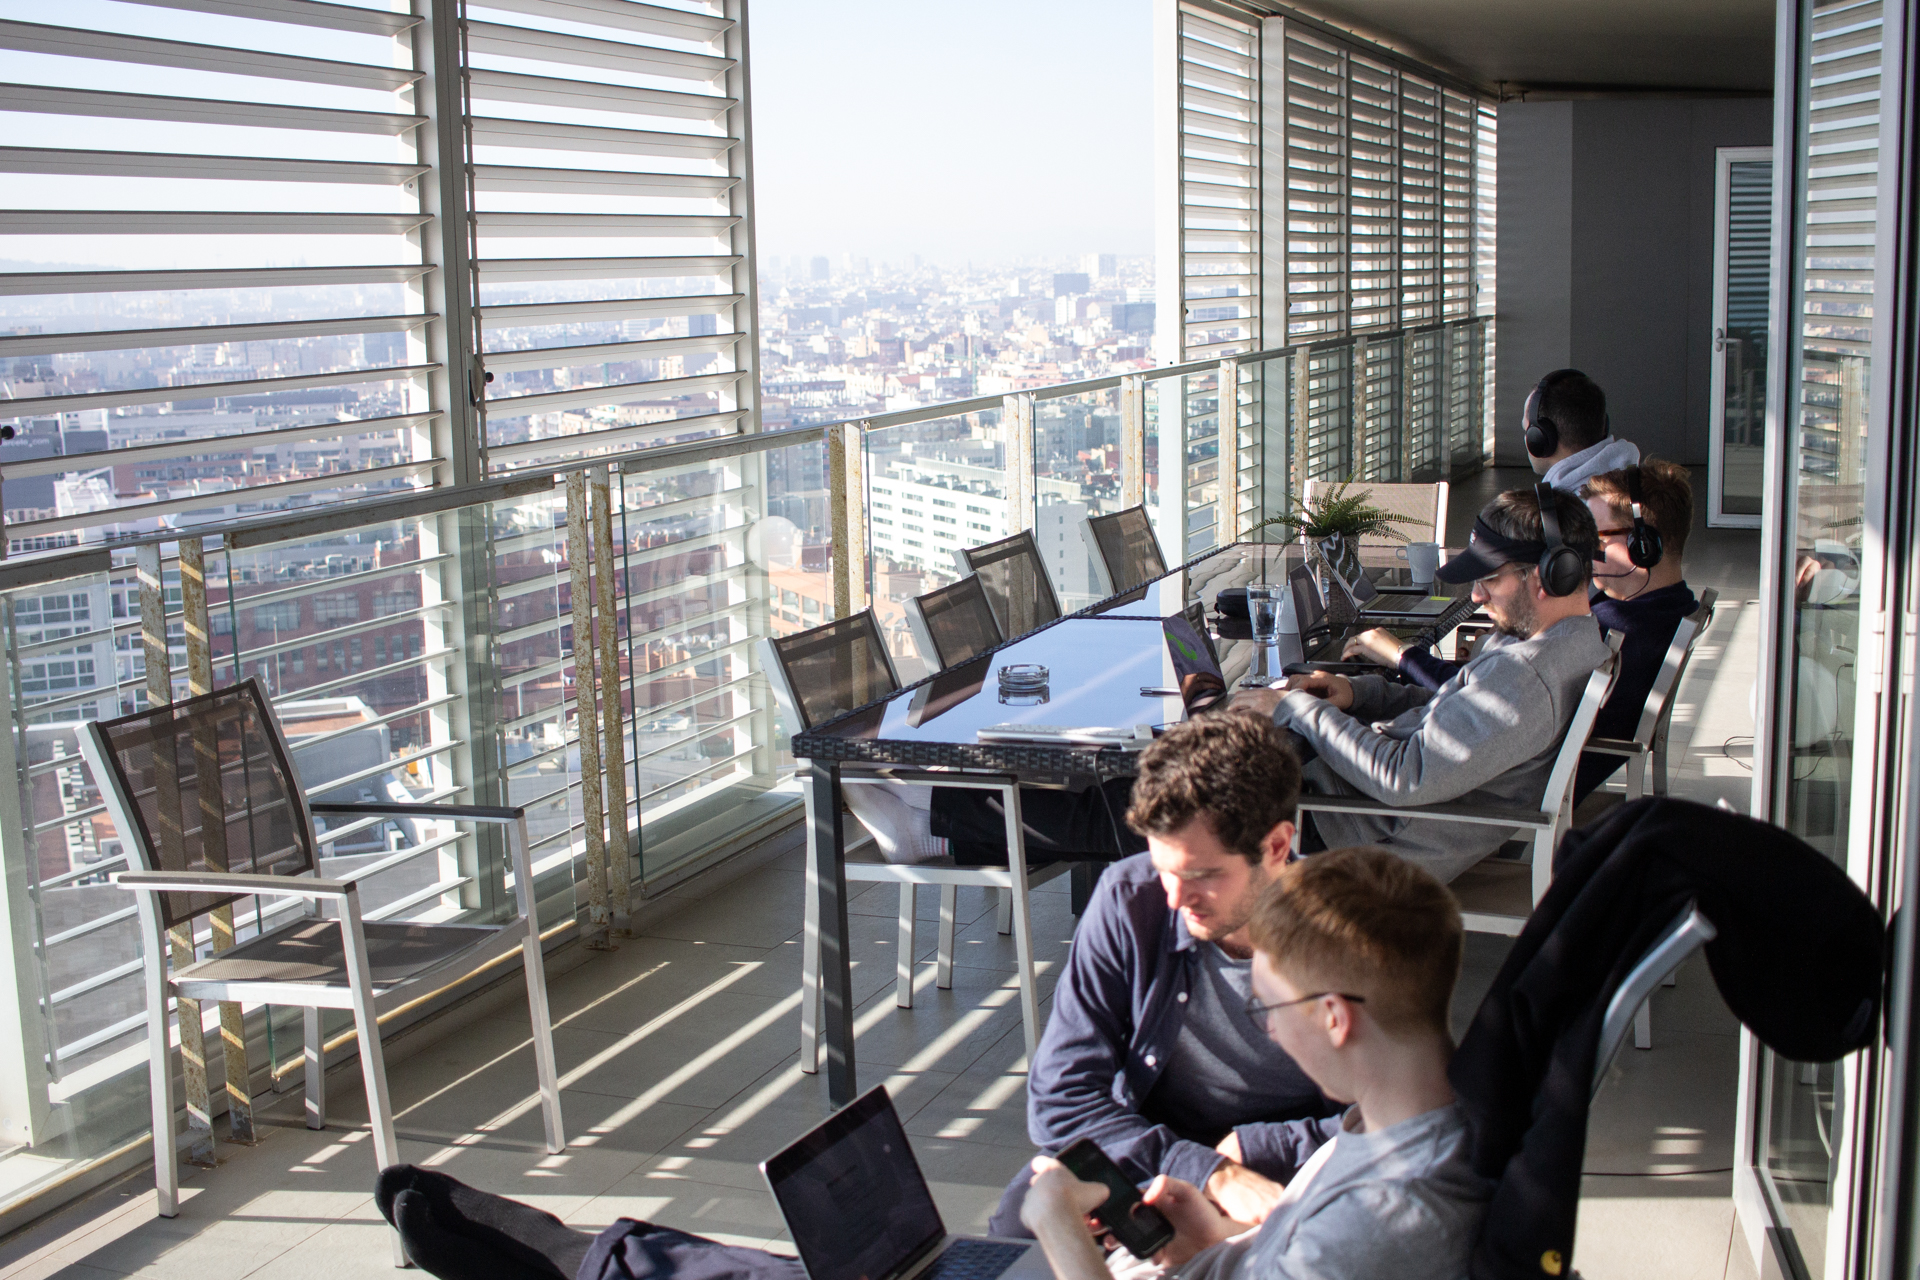 A team at work on laptops on a sunny balcony in Barcelona